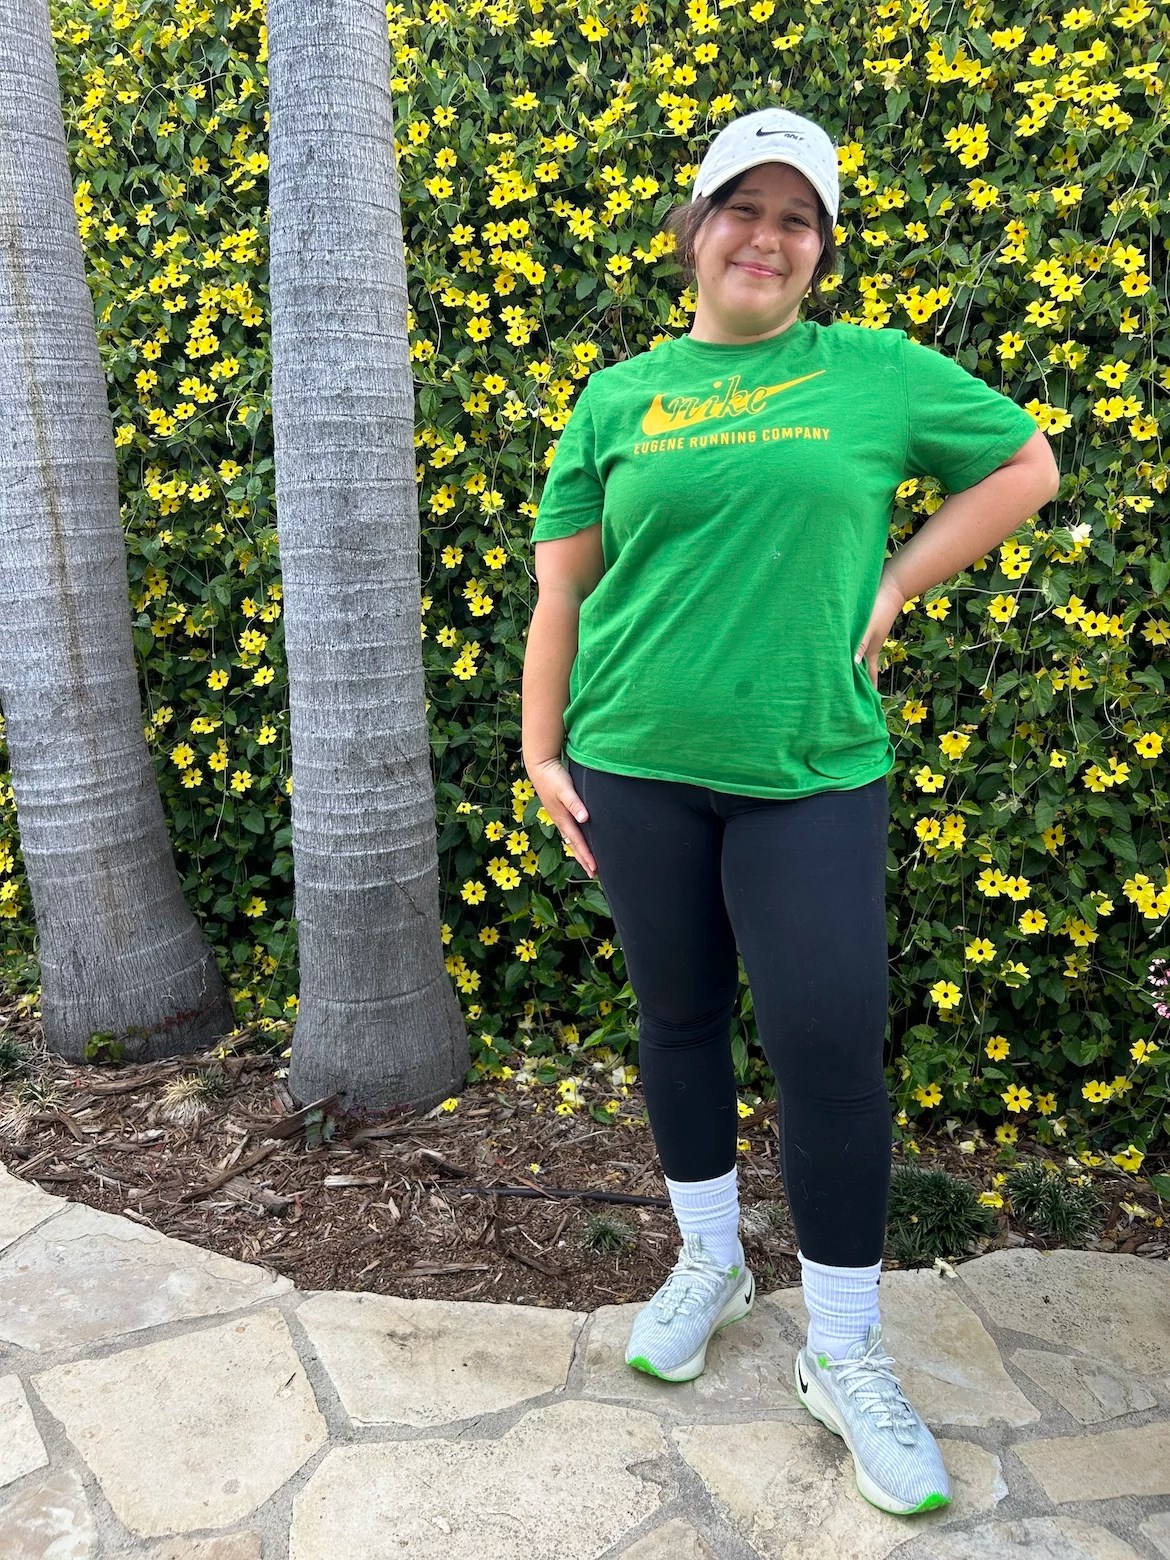 A woman wearing a white hat, green t-shirt with a yellow Nike swoosh logo, black leggings, white tube socks, and gray, white, and green tennis shoes stands in front of a green vine with yellow flowers.